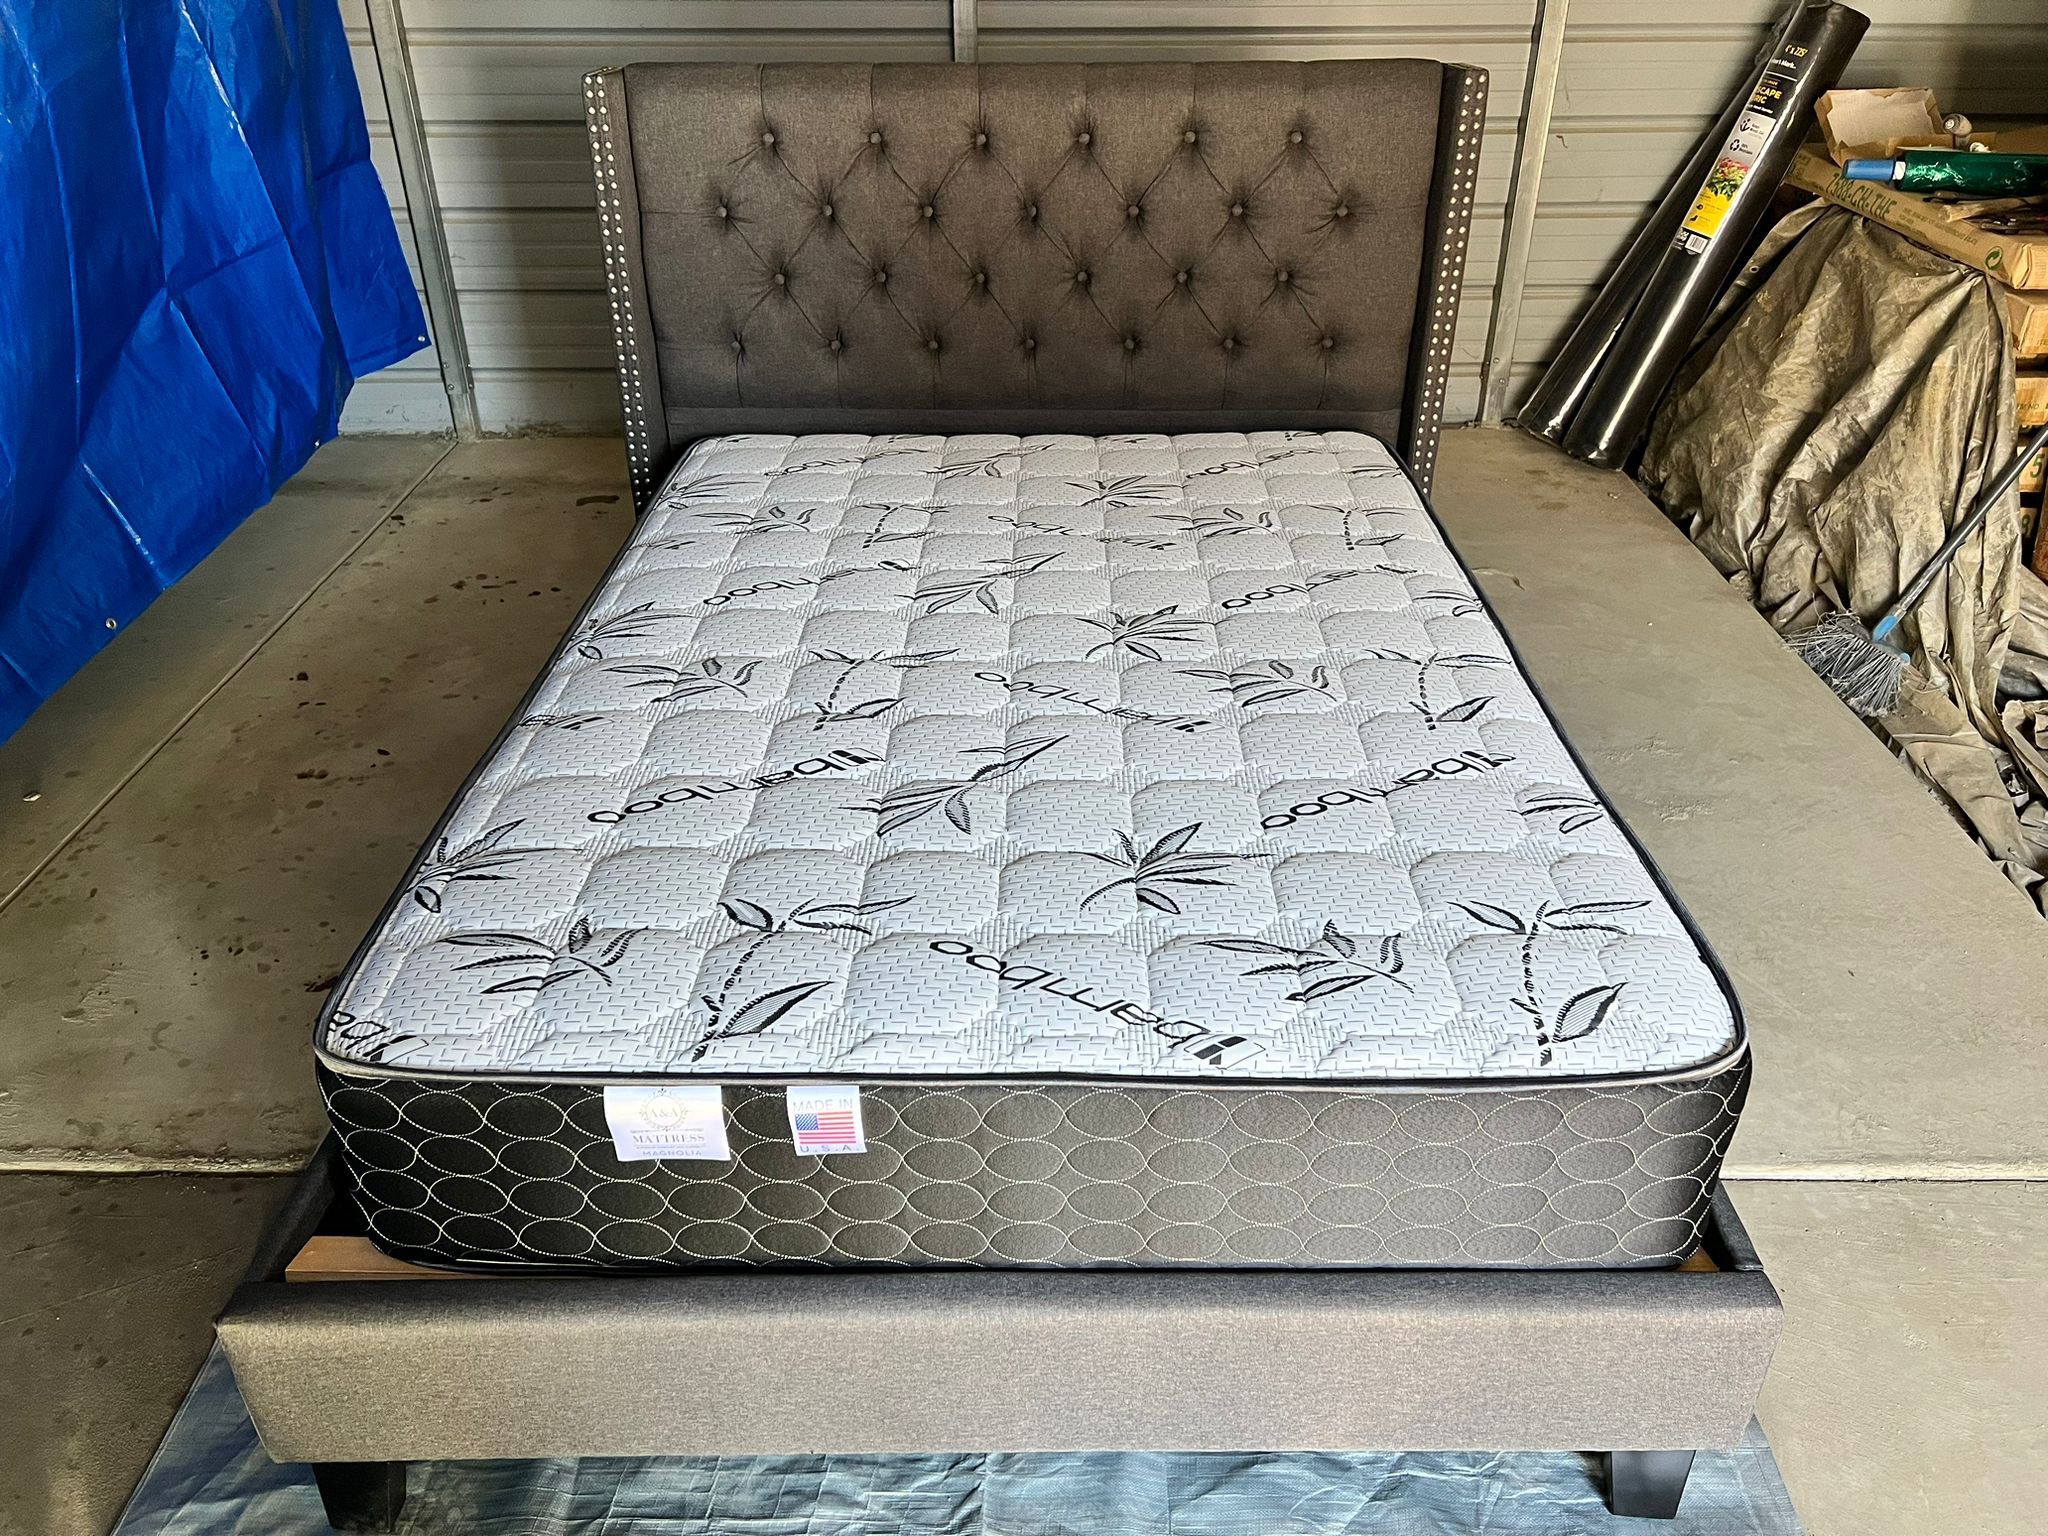 Gray Queen Bed With Mattress Sale 